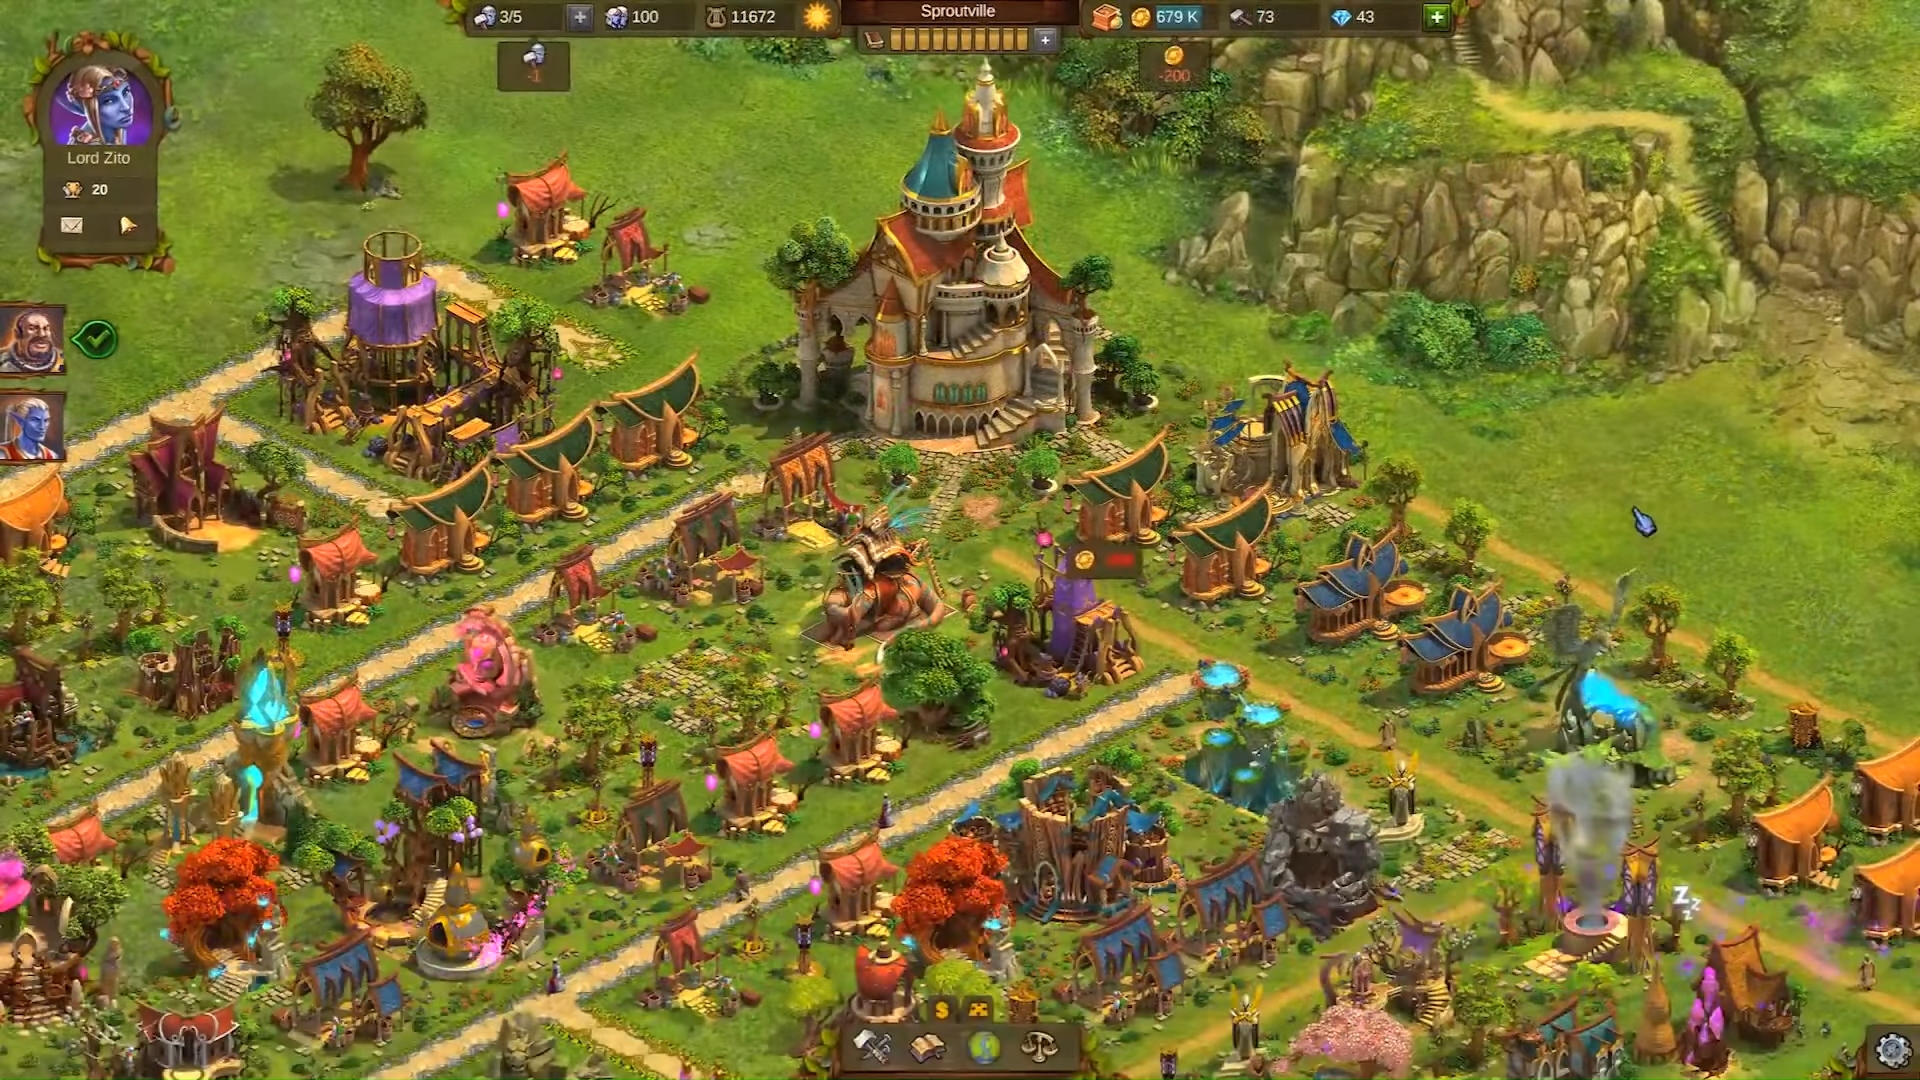 Best mobile games - Elvenar. Image shows a fantasy city from an isometric perspective.